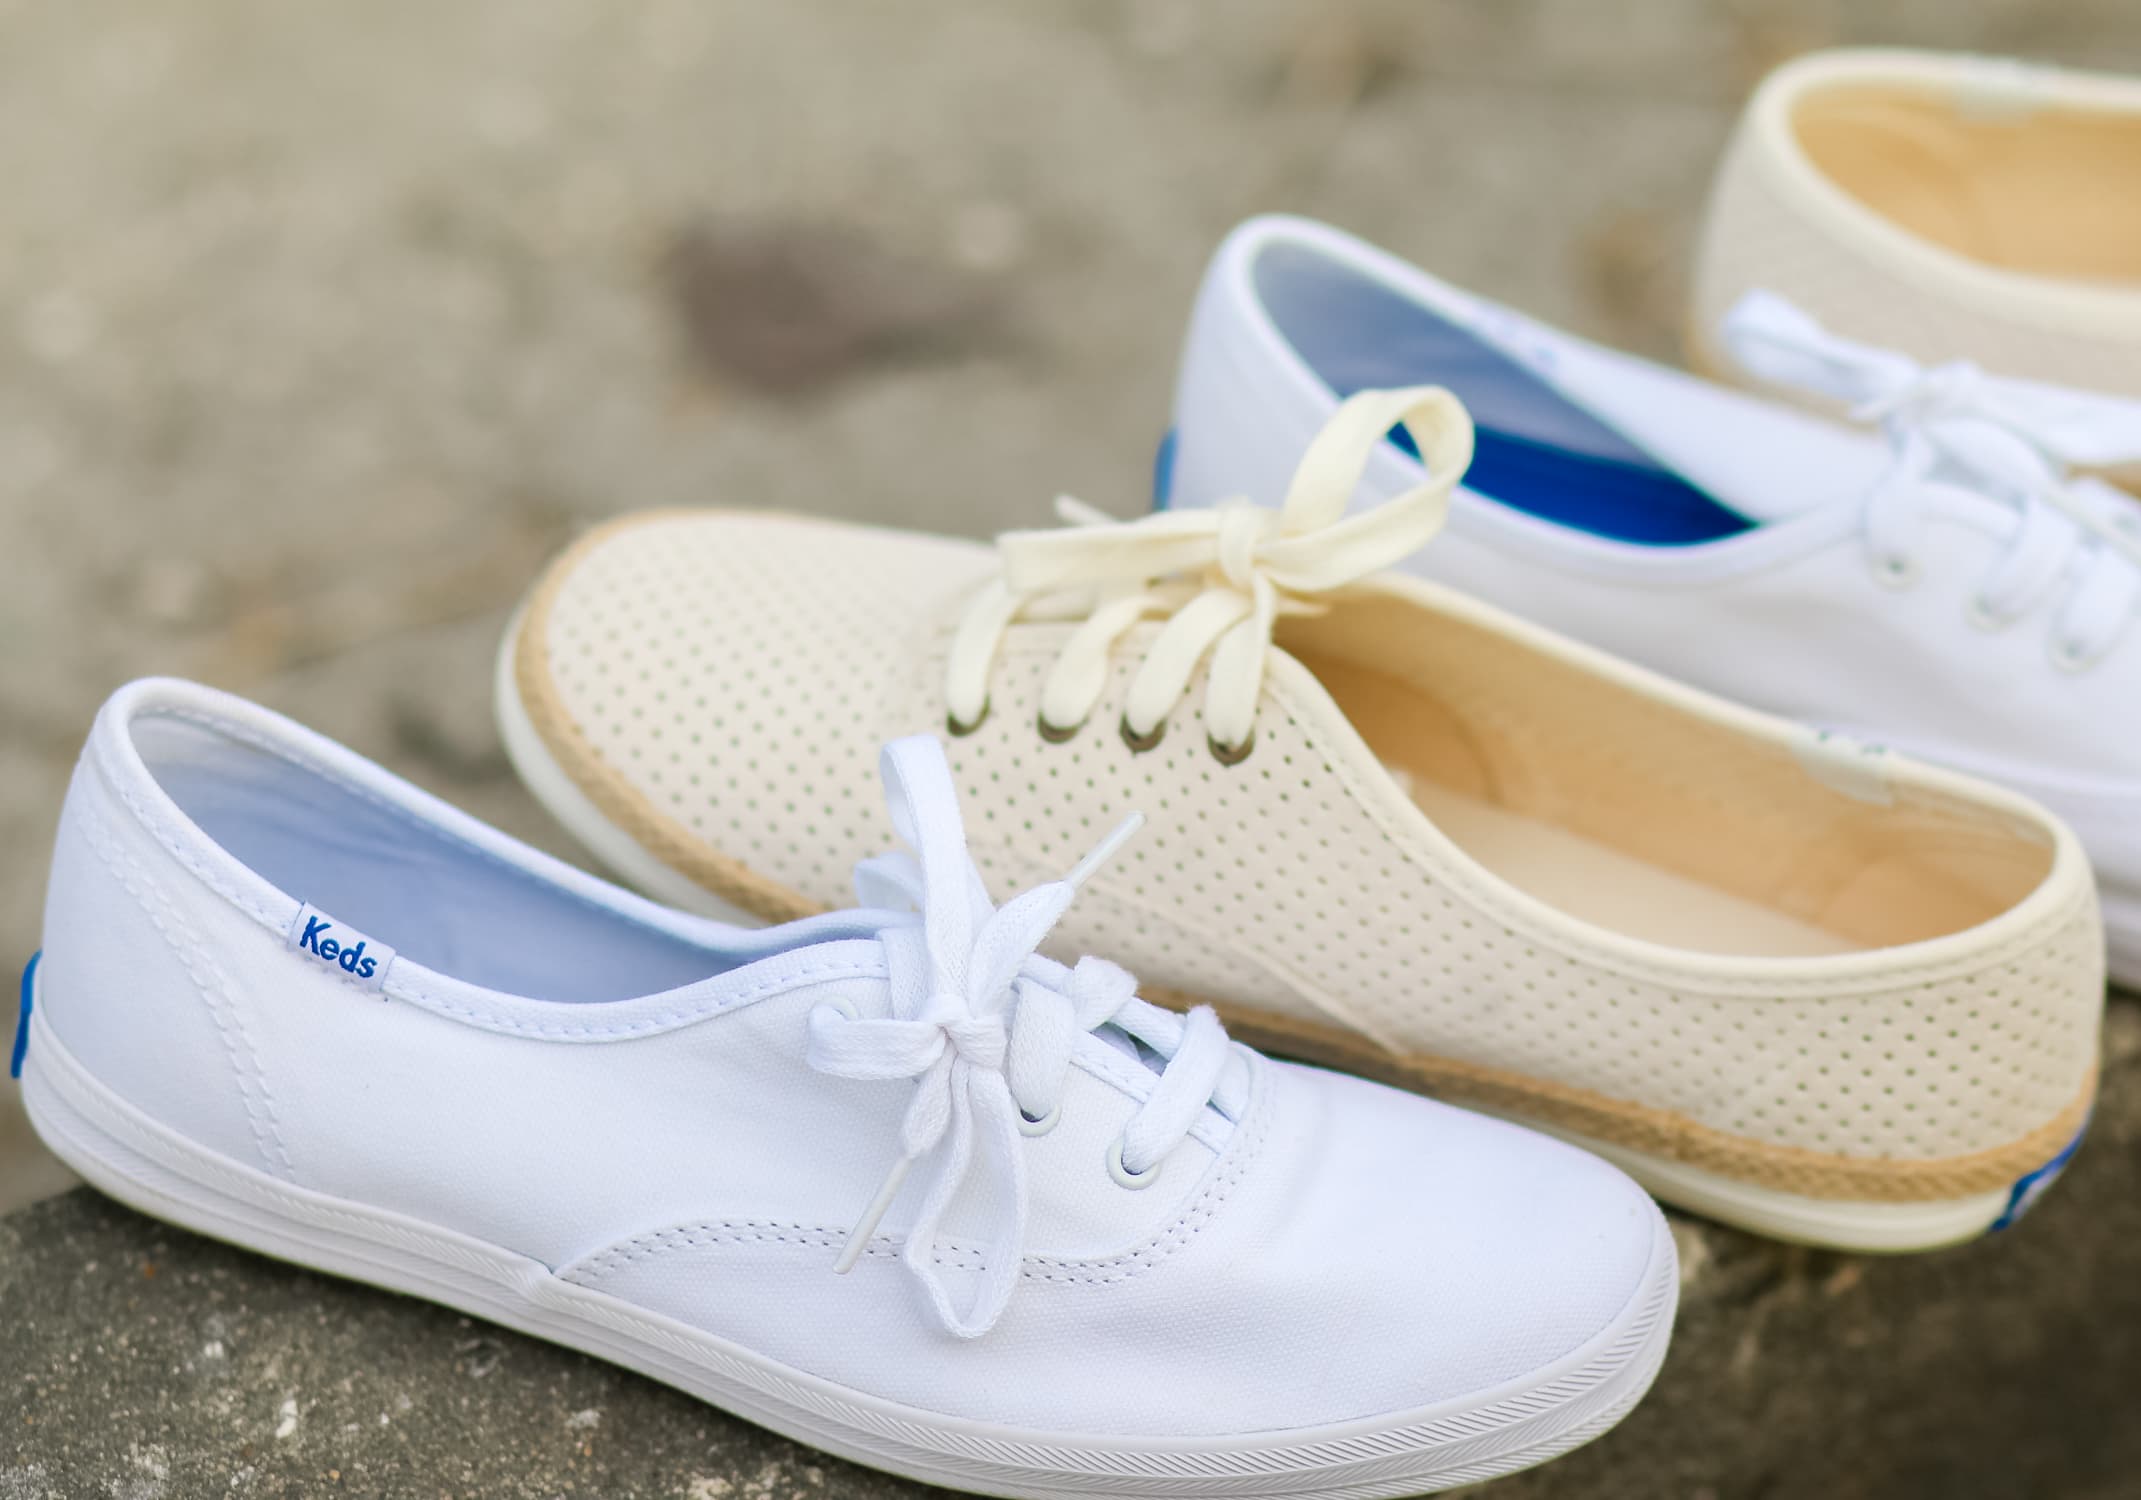 I'm loving my new Keds Champion Canvas CVO and Keds Champion Perf Suede with Jute sneakers from Zappos. They're absolutely the cutest and most comfortable tennis shoes on the market! Plus, they're absolutely adorable with any spring or summer outfit!